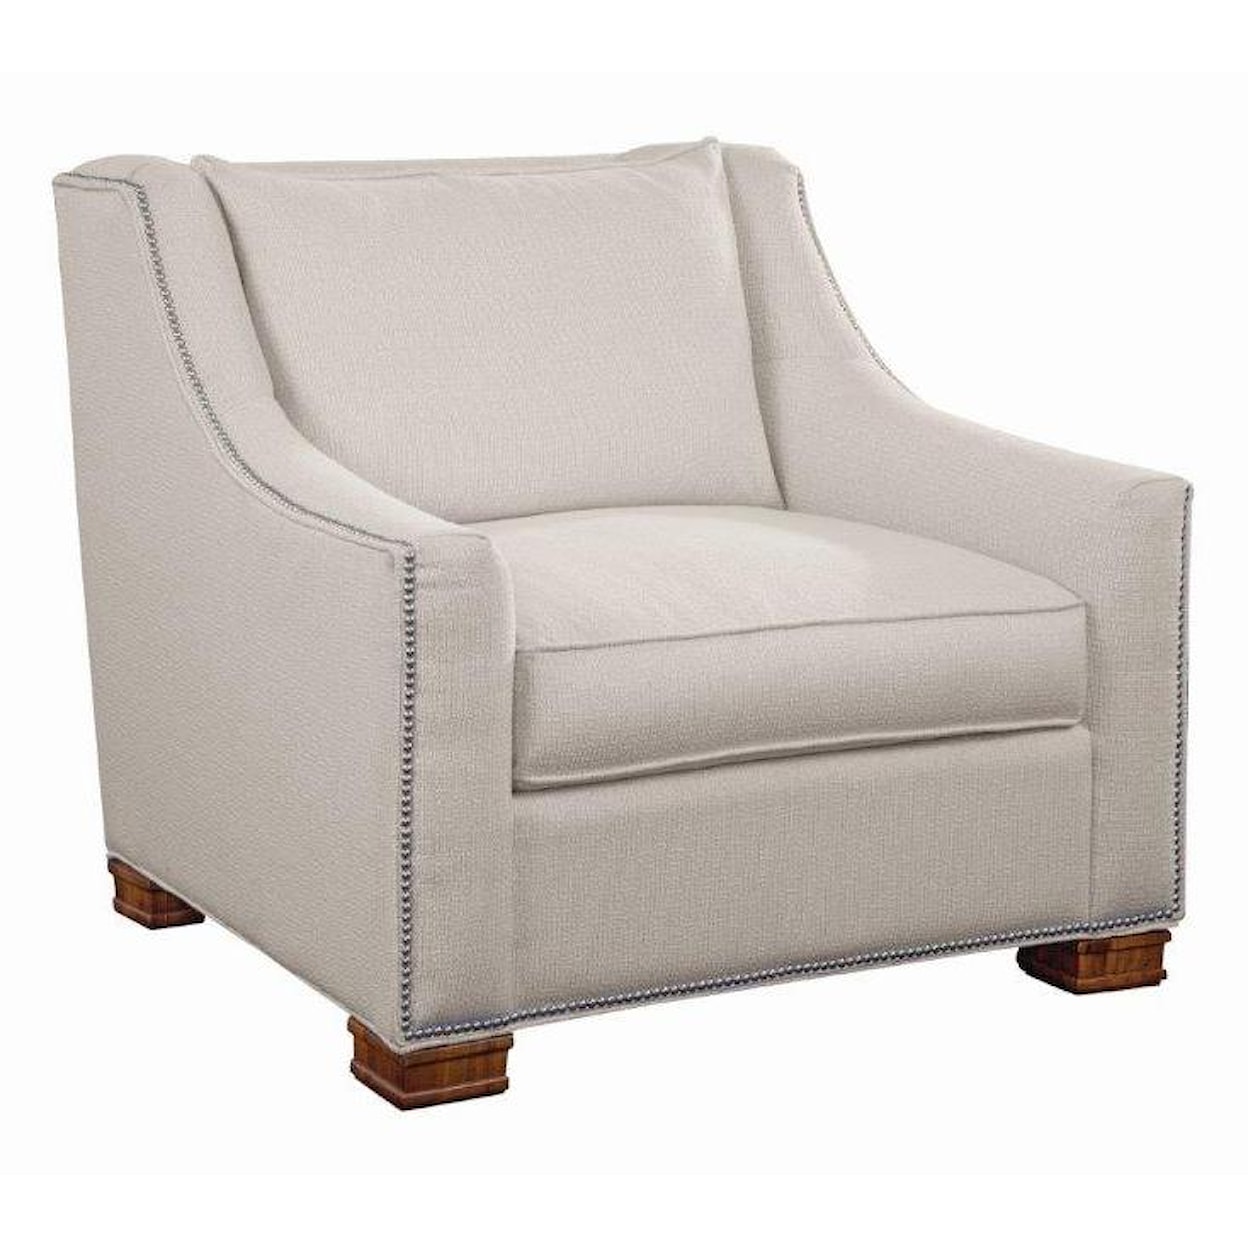 Libby Langdon for Braxton Culler Libby Langdon Brayden Chair w/ Small Nailheads